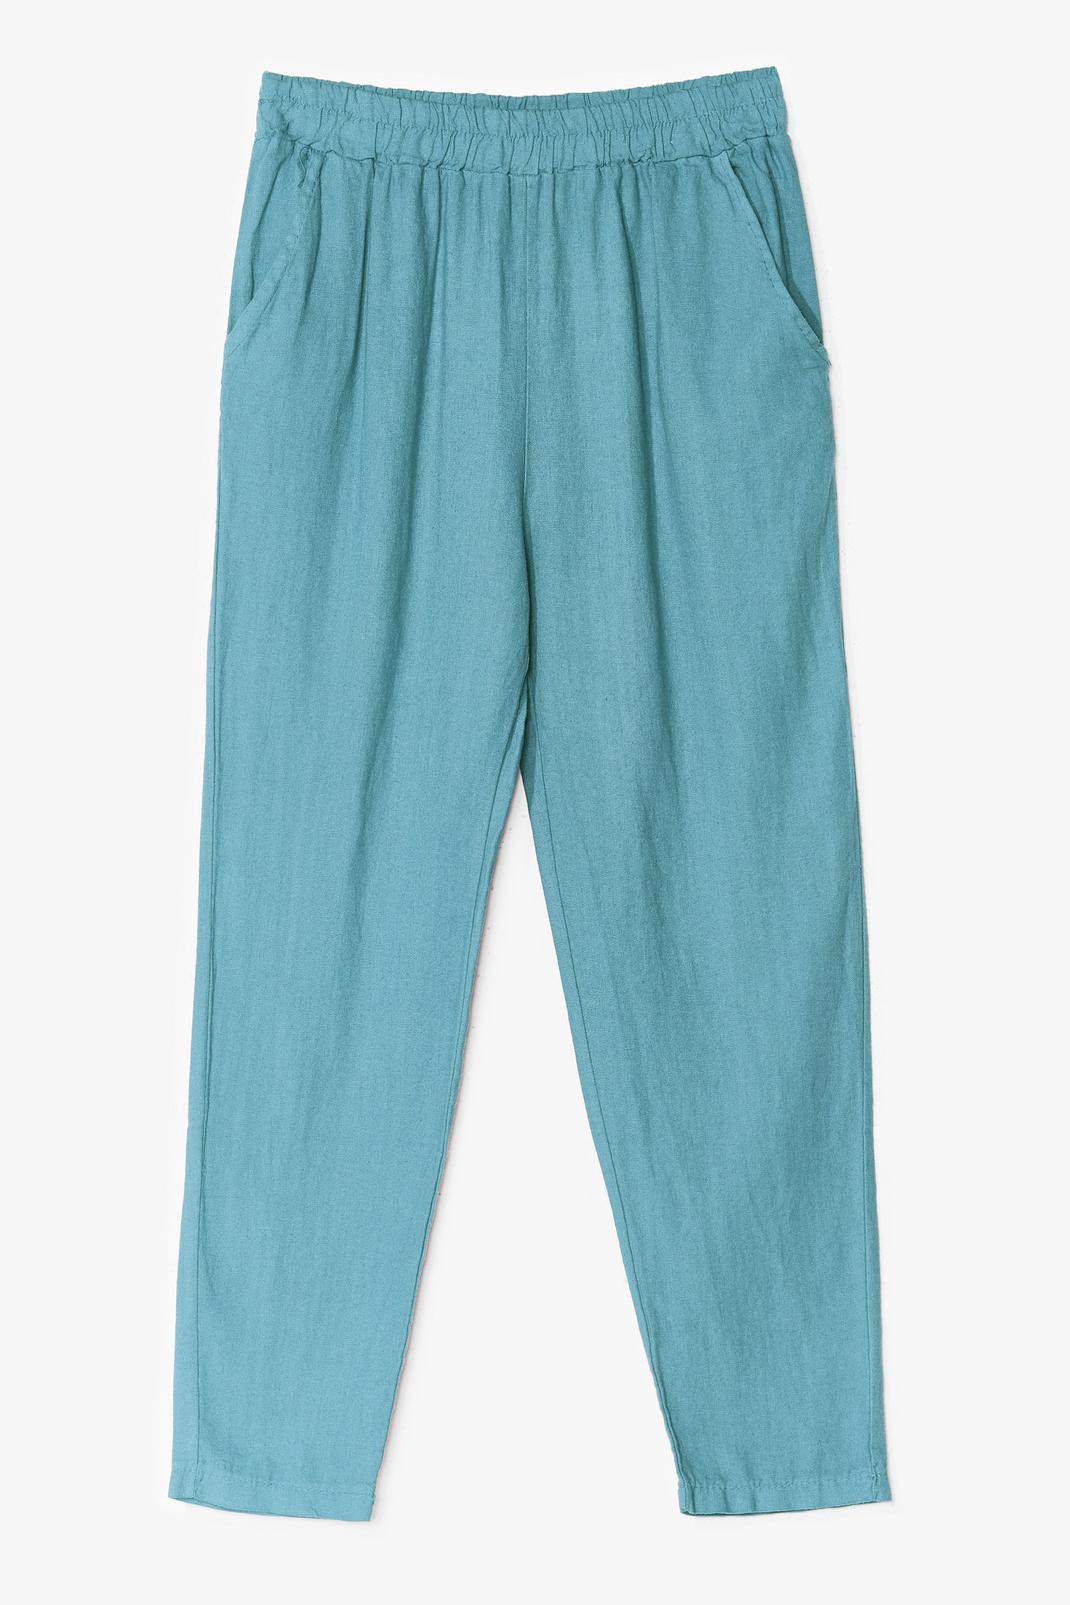 Sage Linen Tapered High Waisted Pants image number 1